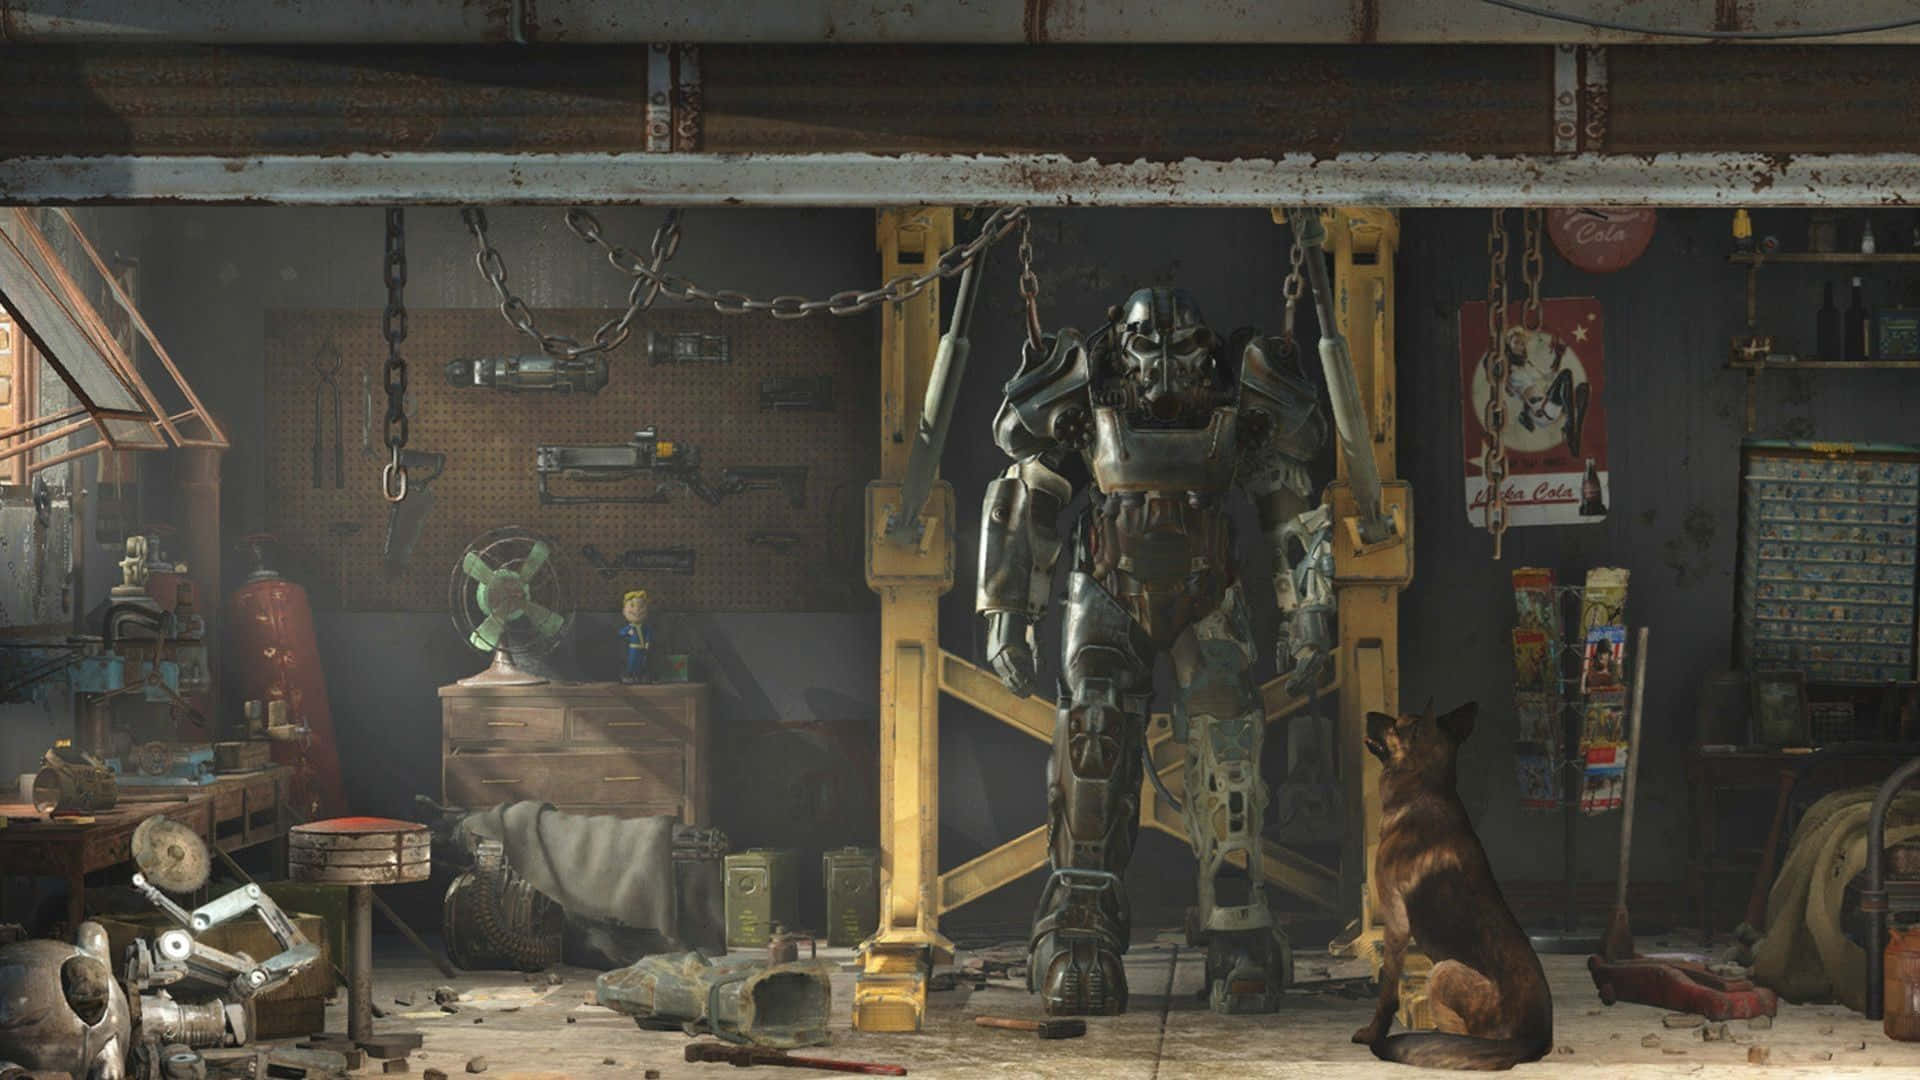 Stunning Fallout 4 Power Armor in action Wallpaper